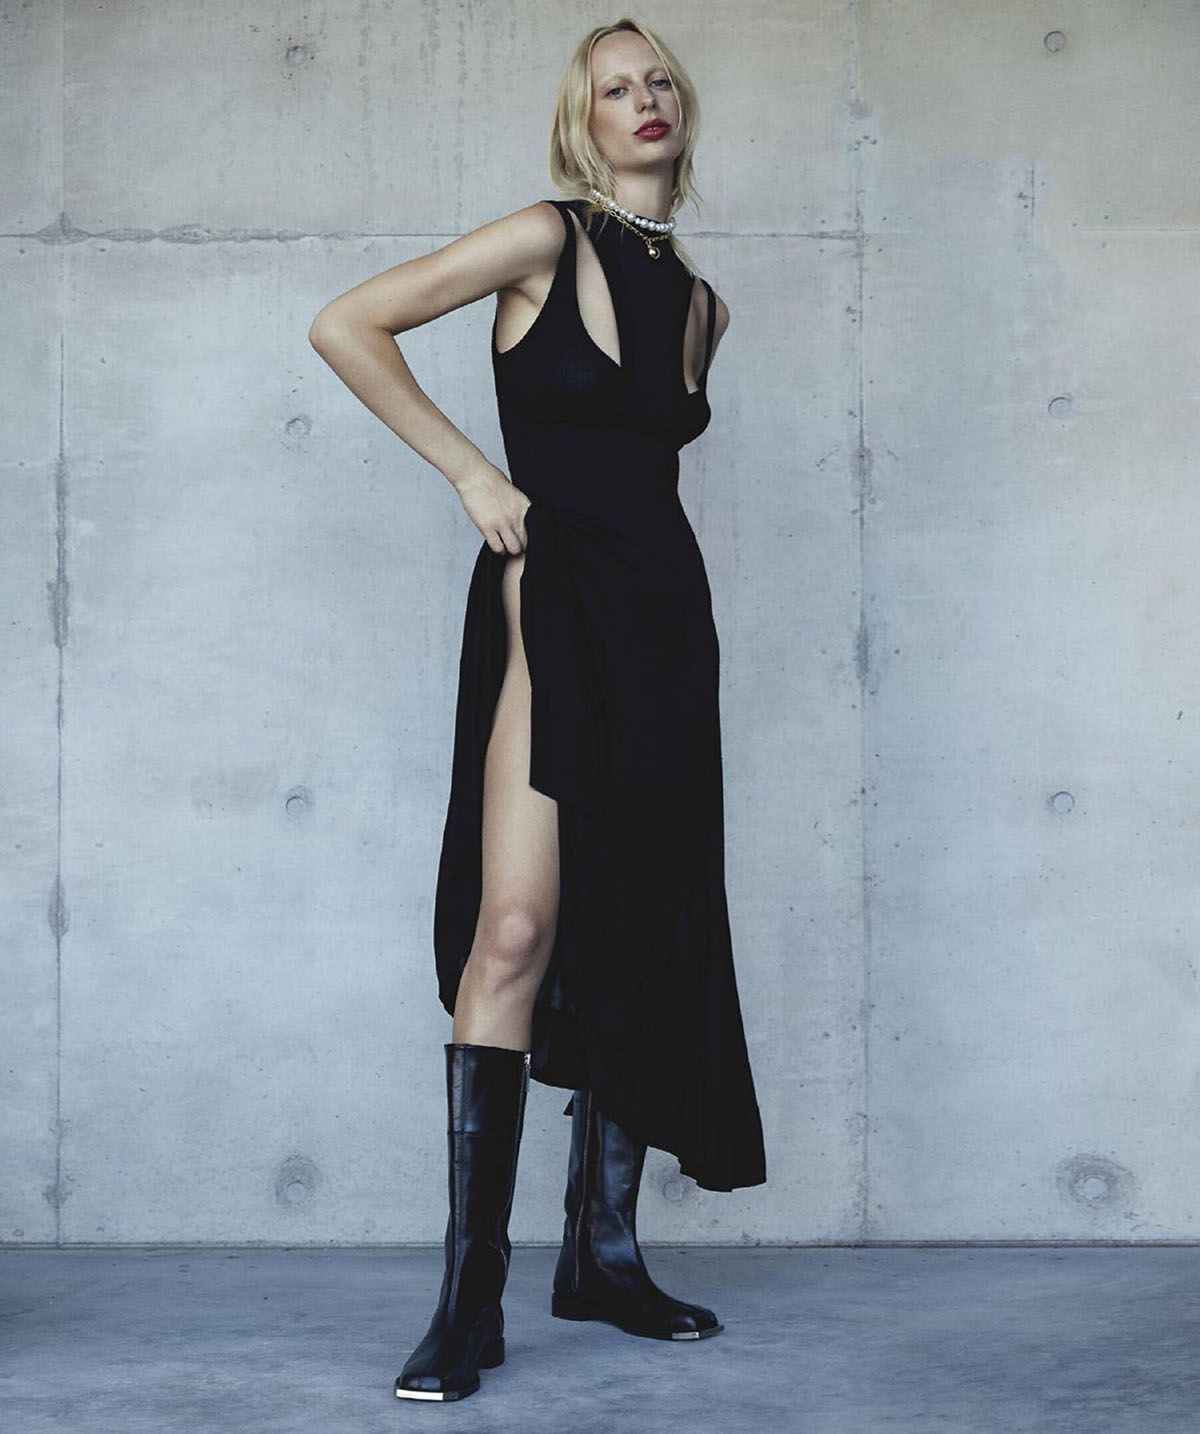 Clothing & Accessories: Dress, Top, Boots by Peter Do; Necklace by Paspaley; Necklace by Tiffany & Co. Model: Lili Sumner. Stylist: Jillian Davison. Hair Stylist: Michele McQuillan. Makeup Artist: Kellie Stratton